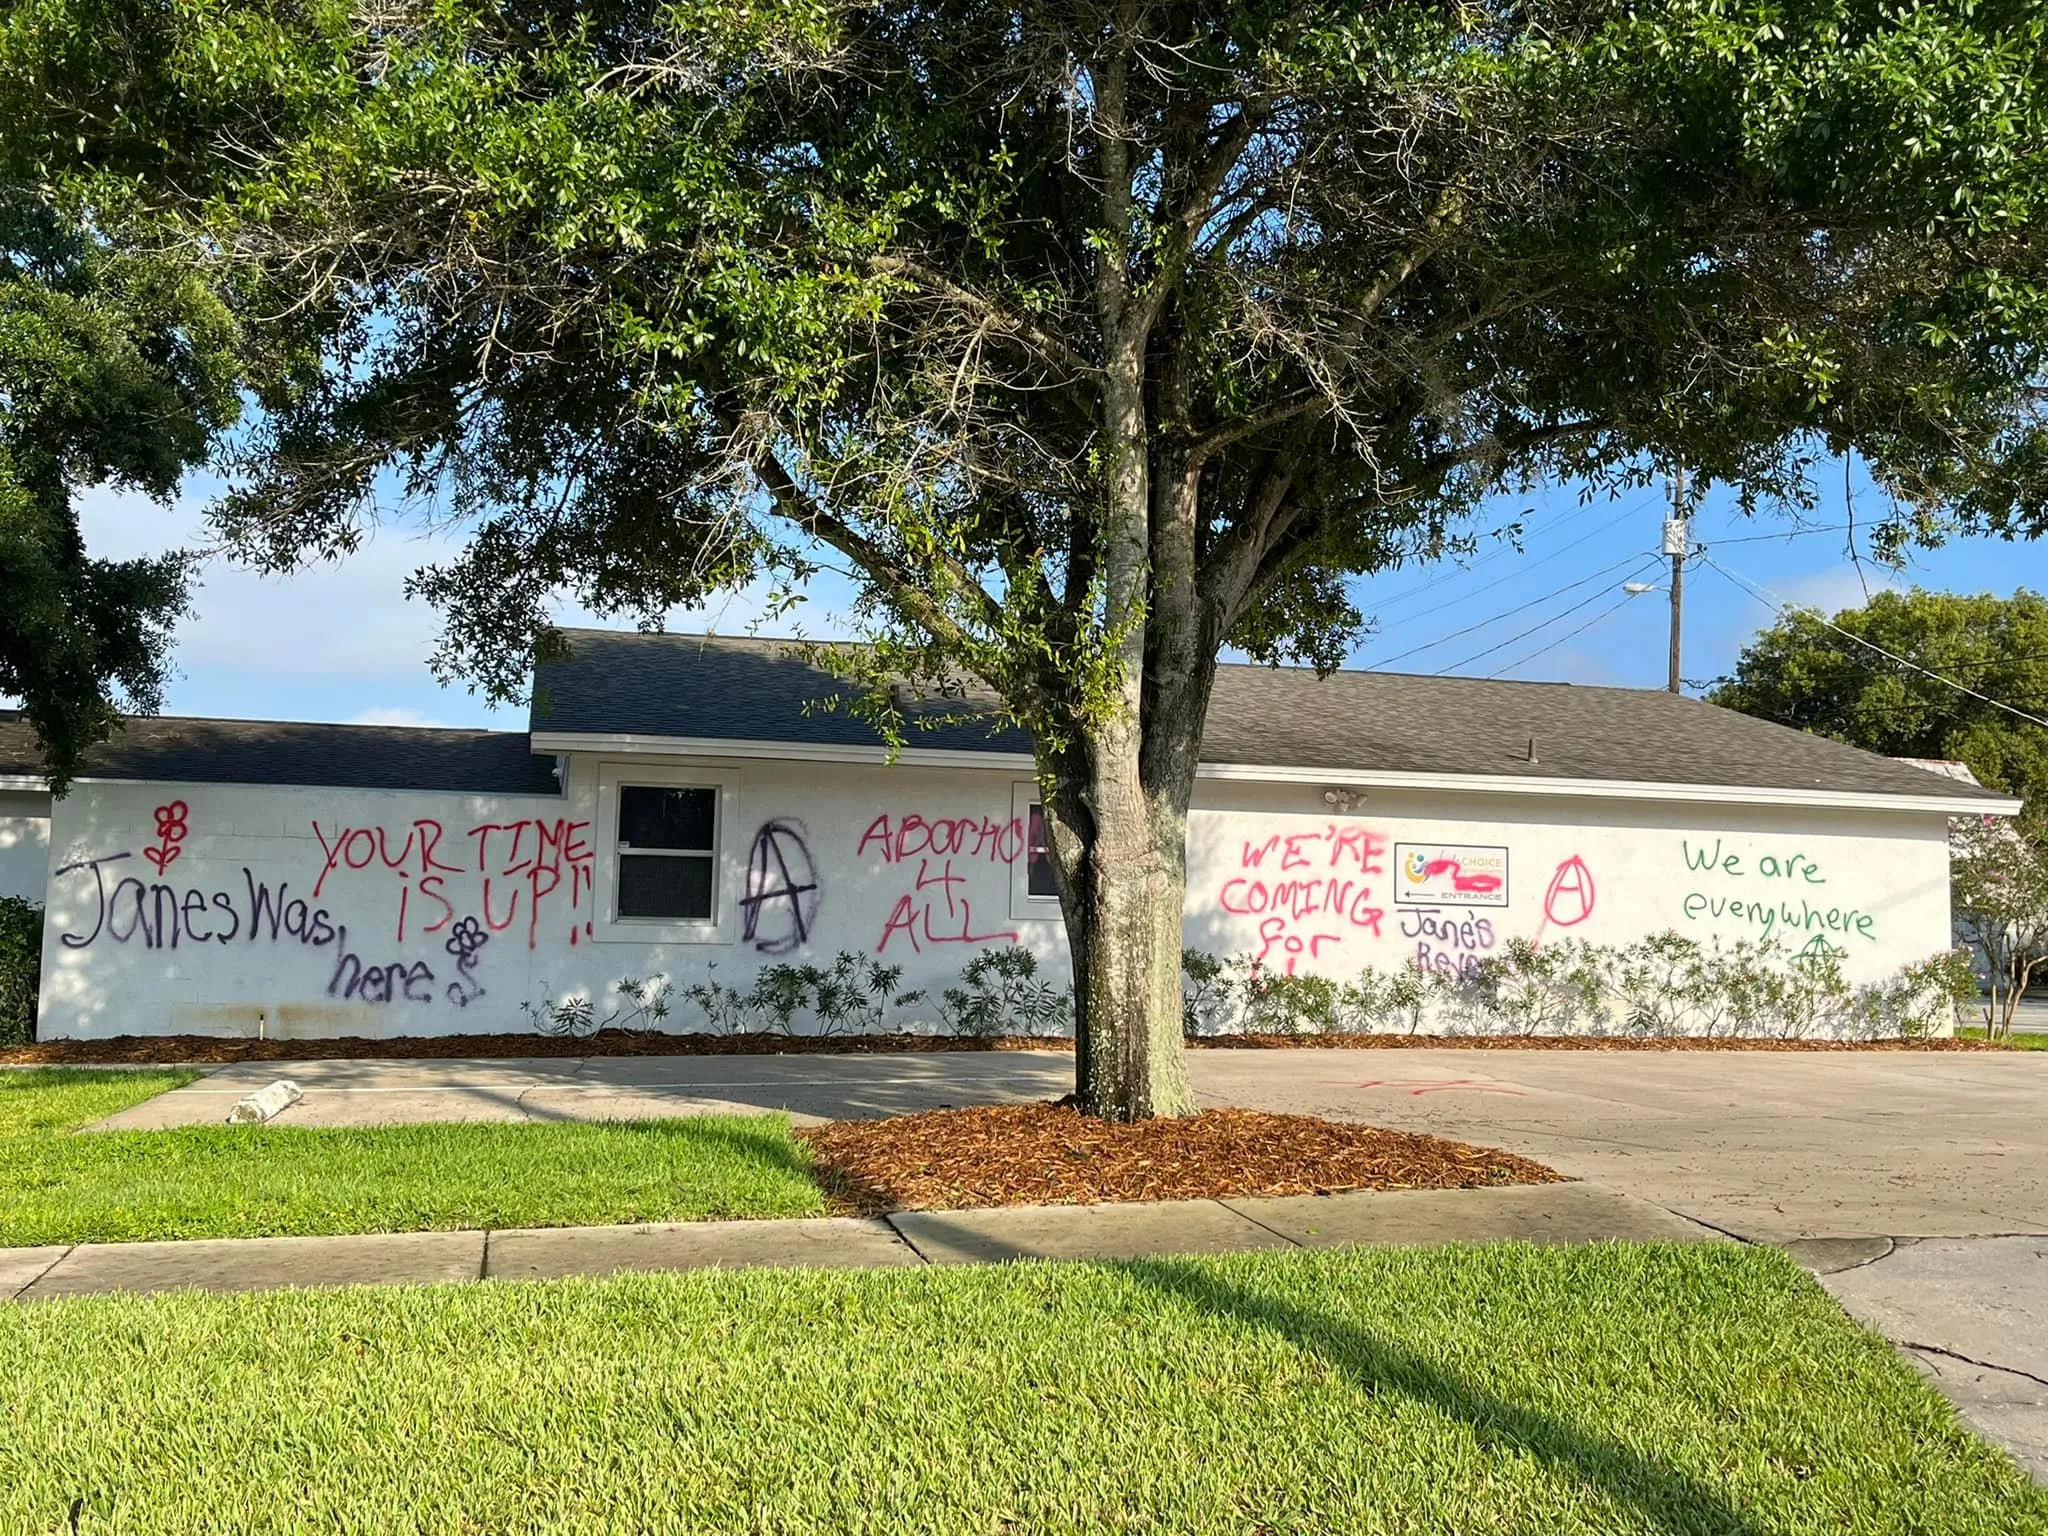 LifeChoice Pregnancy Center in Winter Haven, Florida was defaced with pro-abortion graffiti June 25, 2022.?w=200&h=150